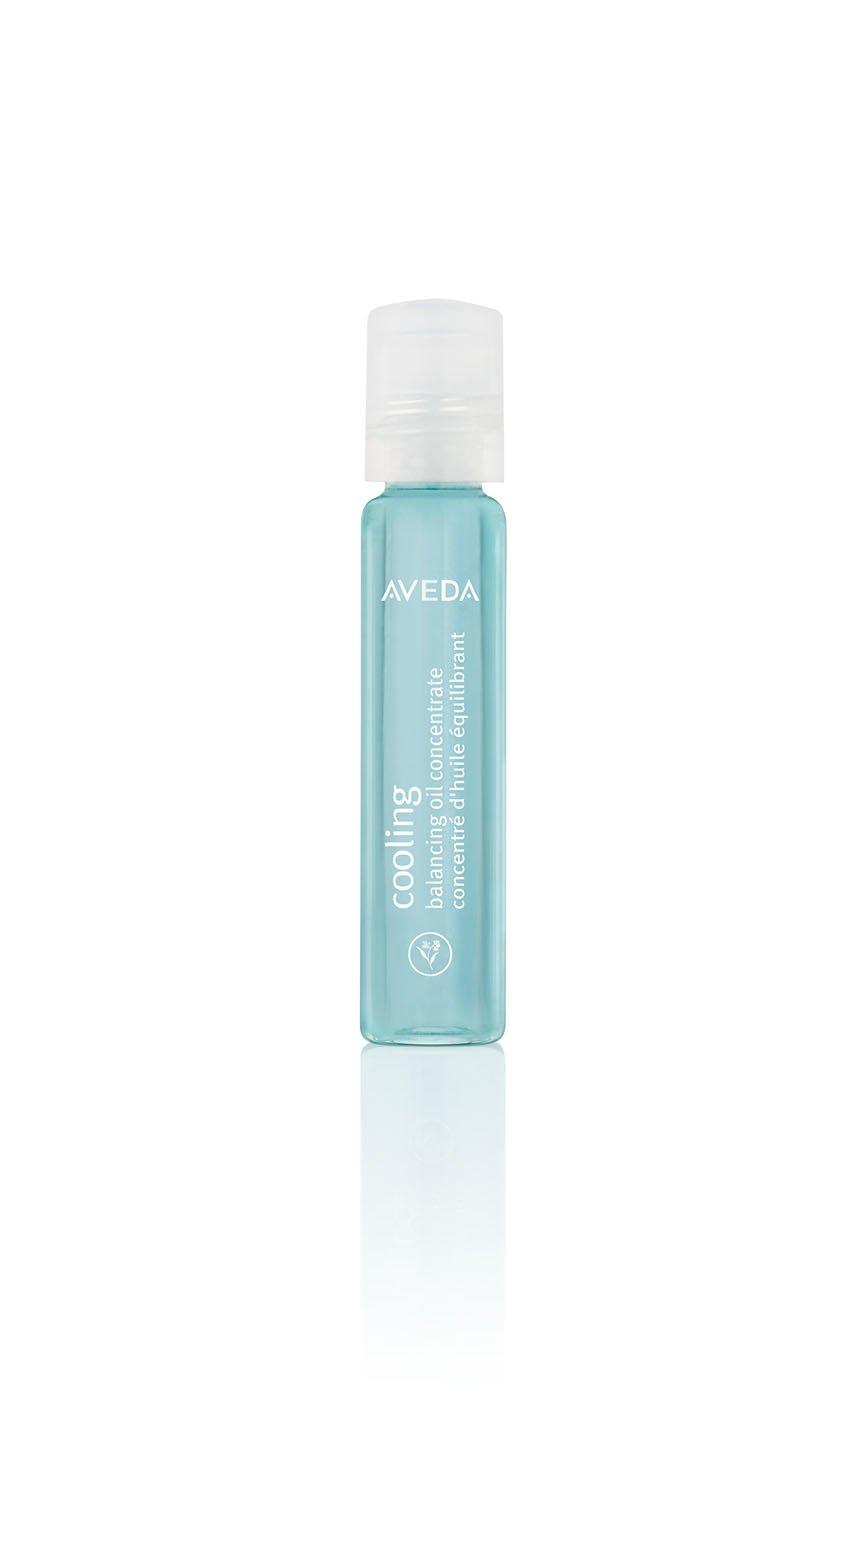 Image of AVEDA Cooling Balancing Oil Concentrate Rollerball - 7ml